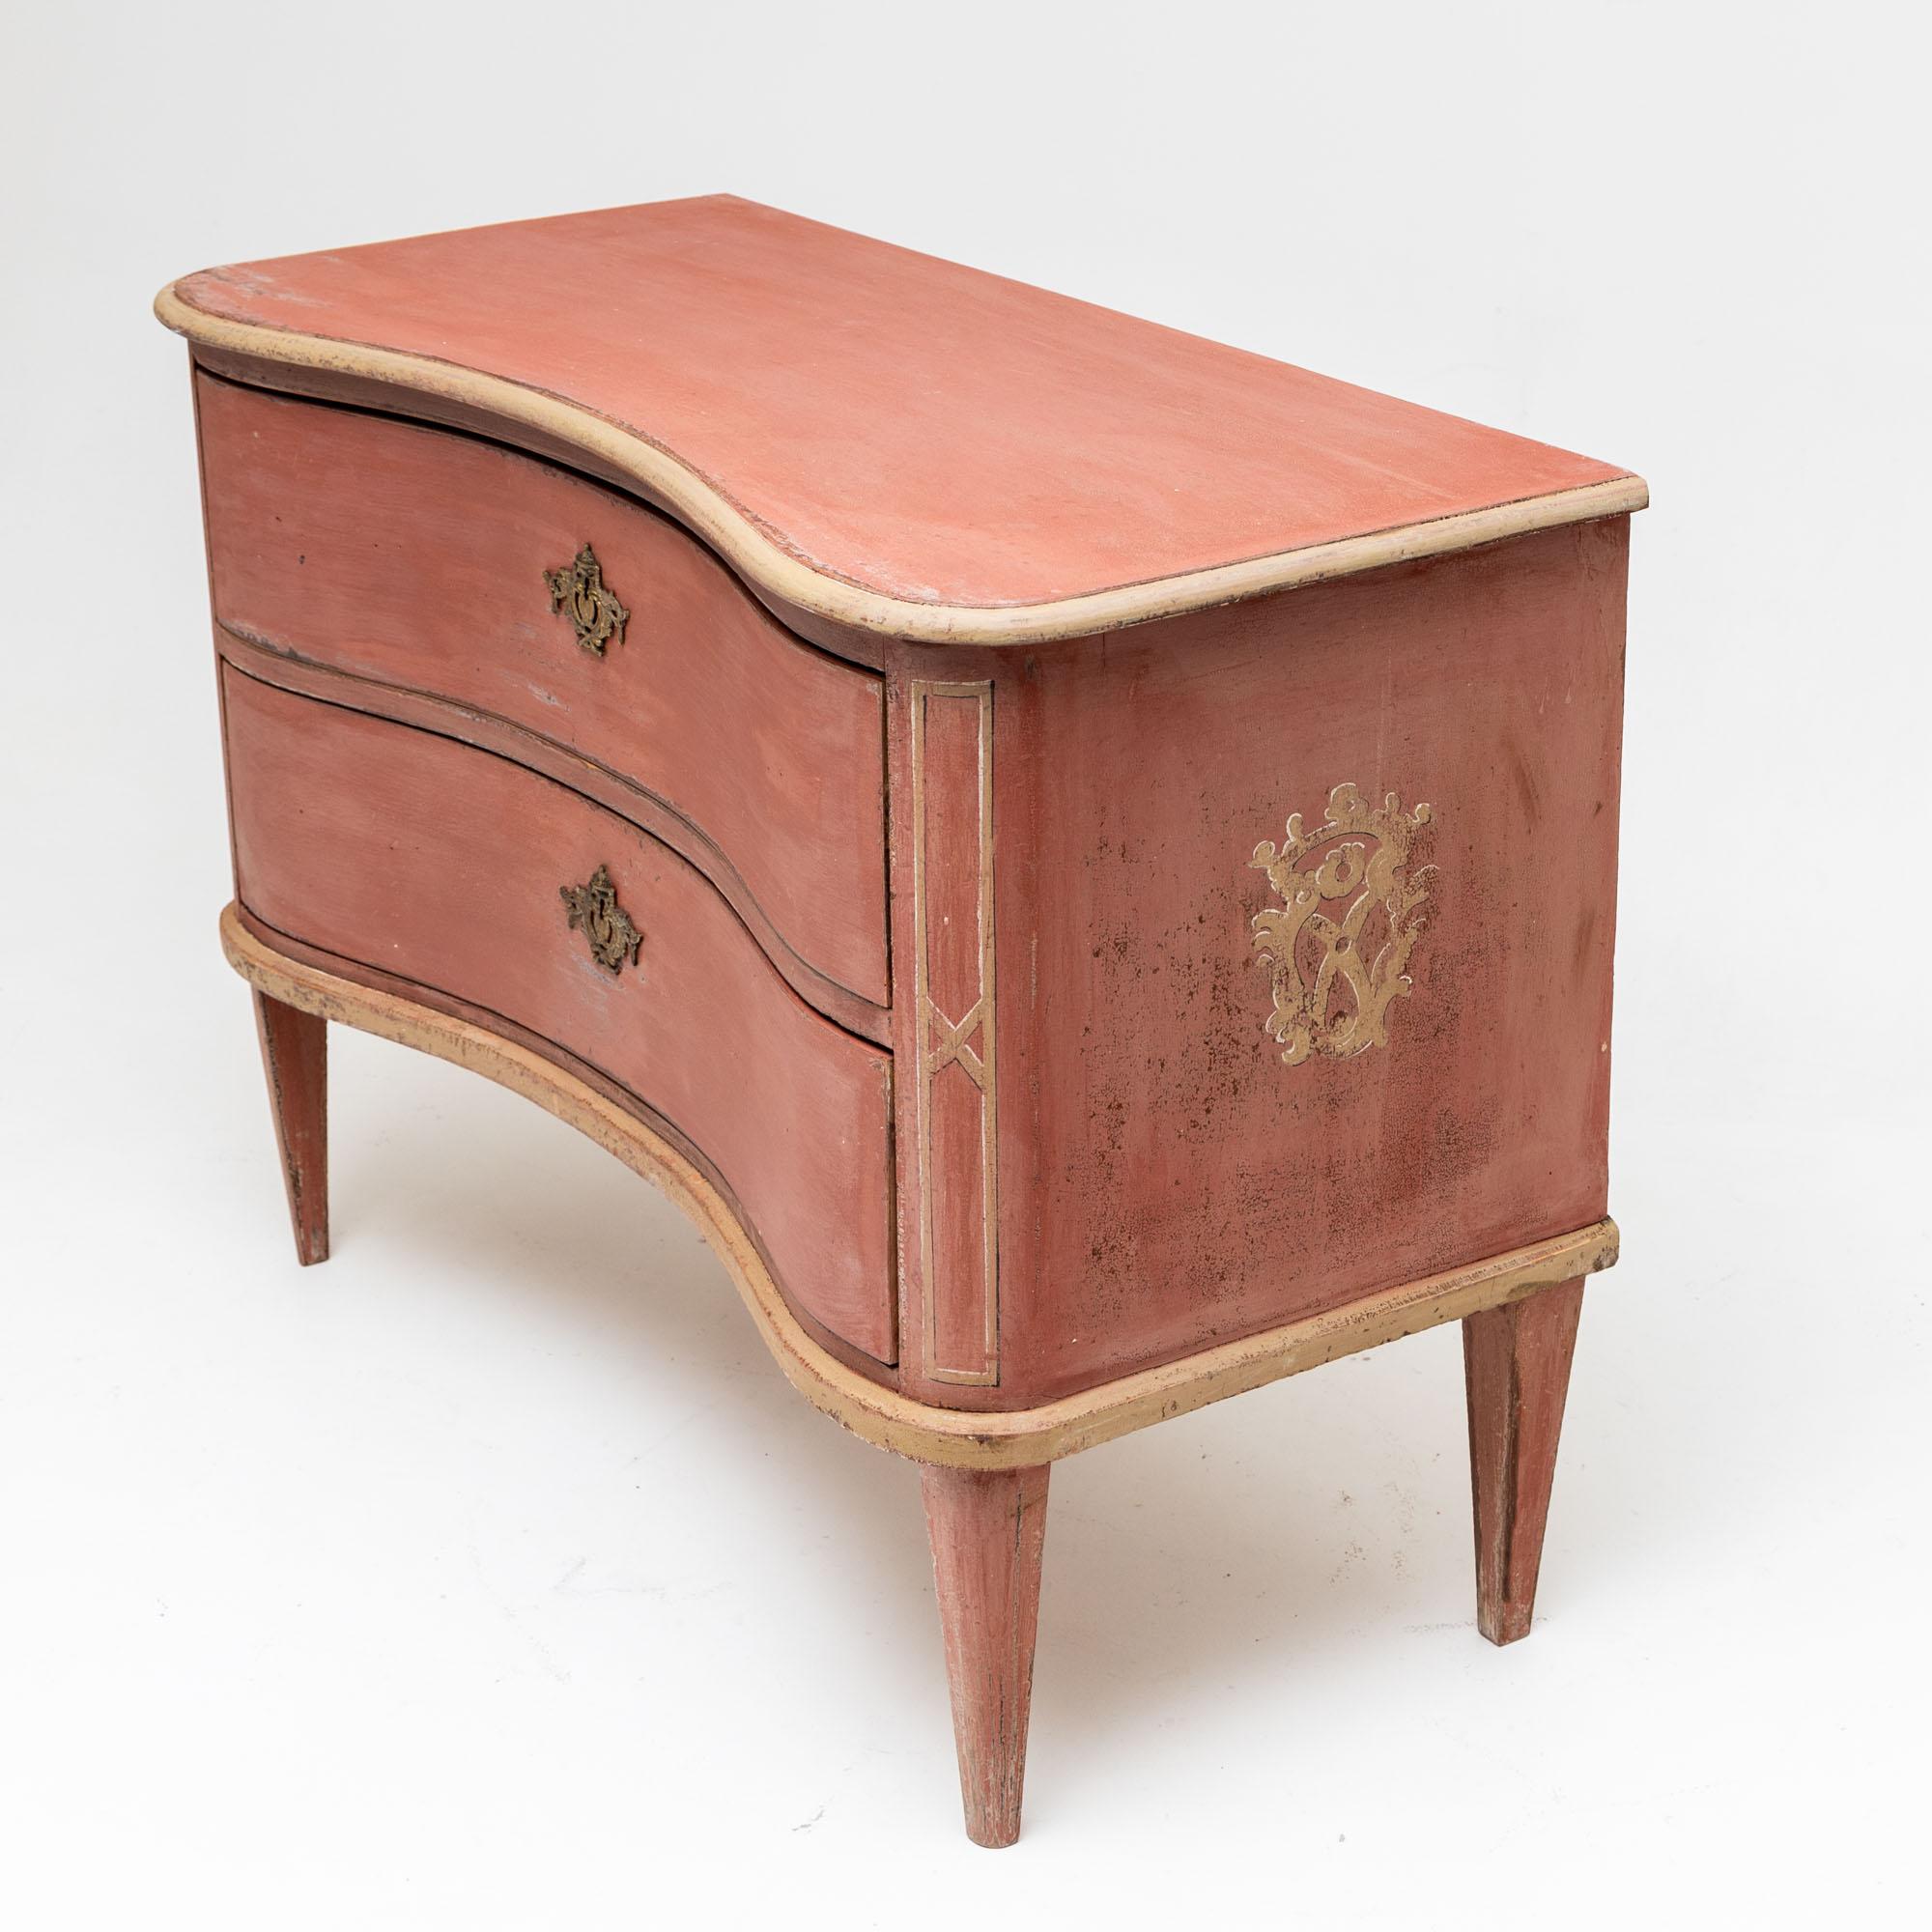 Elegant two-tier chest of drawers with bronze fittings, curved front and square tapered feet. The chest of drawers has been repainted and given an antique patina. The decorations are based on historical models. The brick-red colour is contrasted by